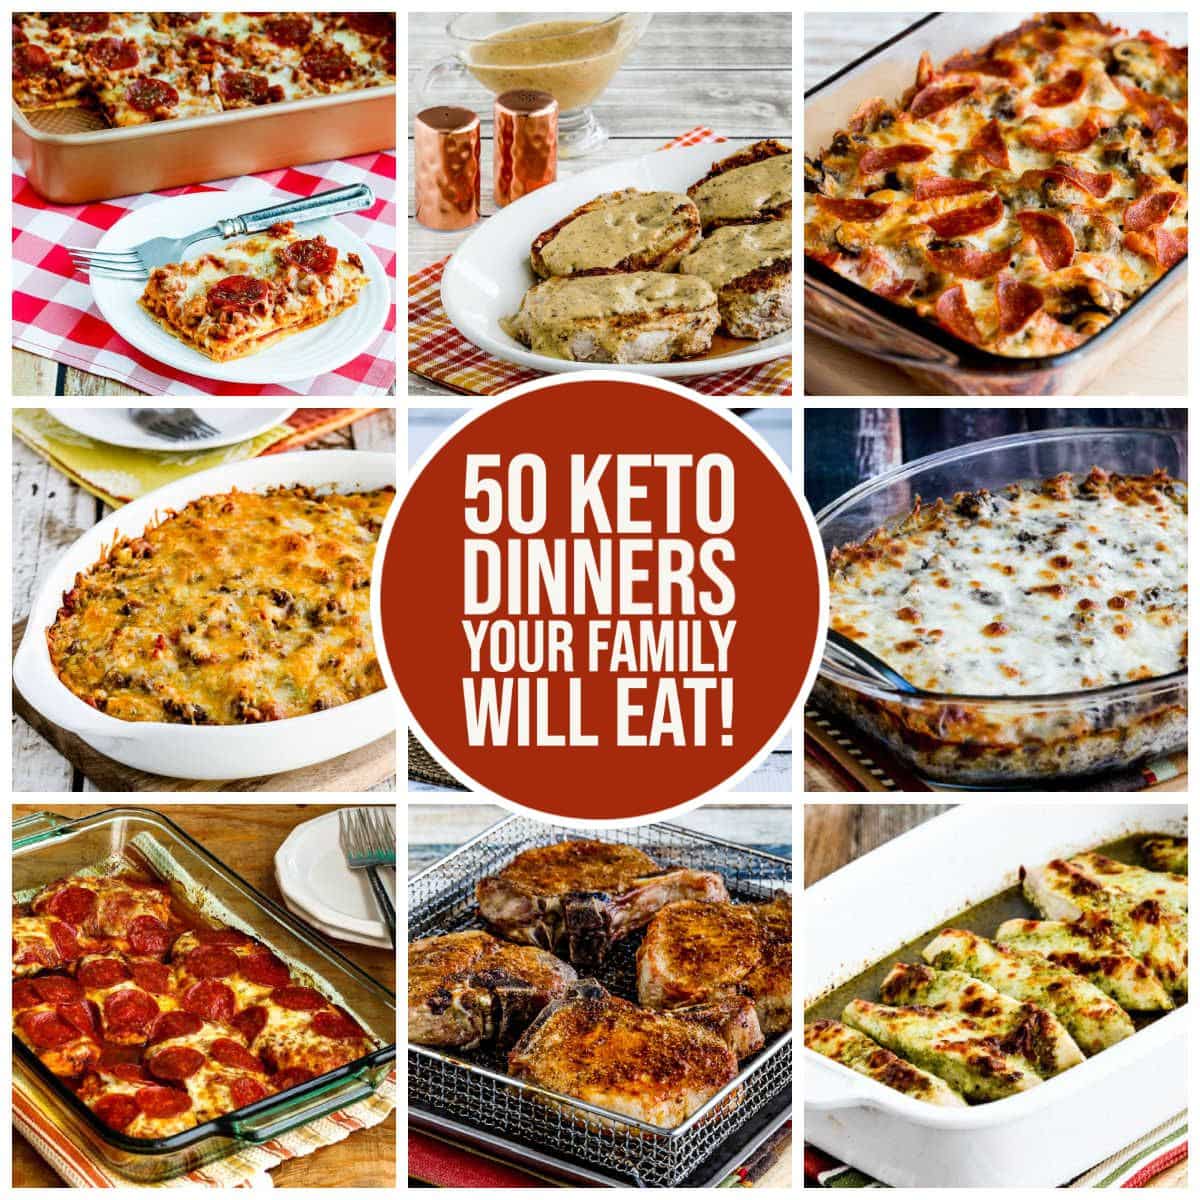 50 Keto Dinners Your Family Will Eat text overlay collage of featured recipes